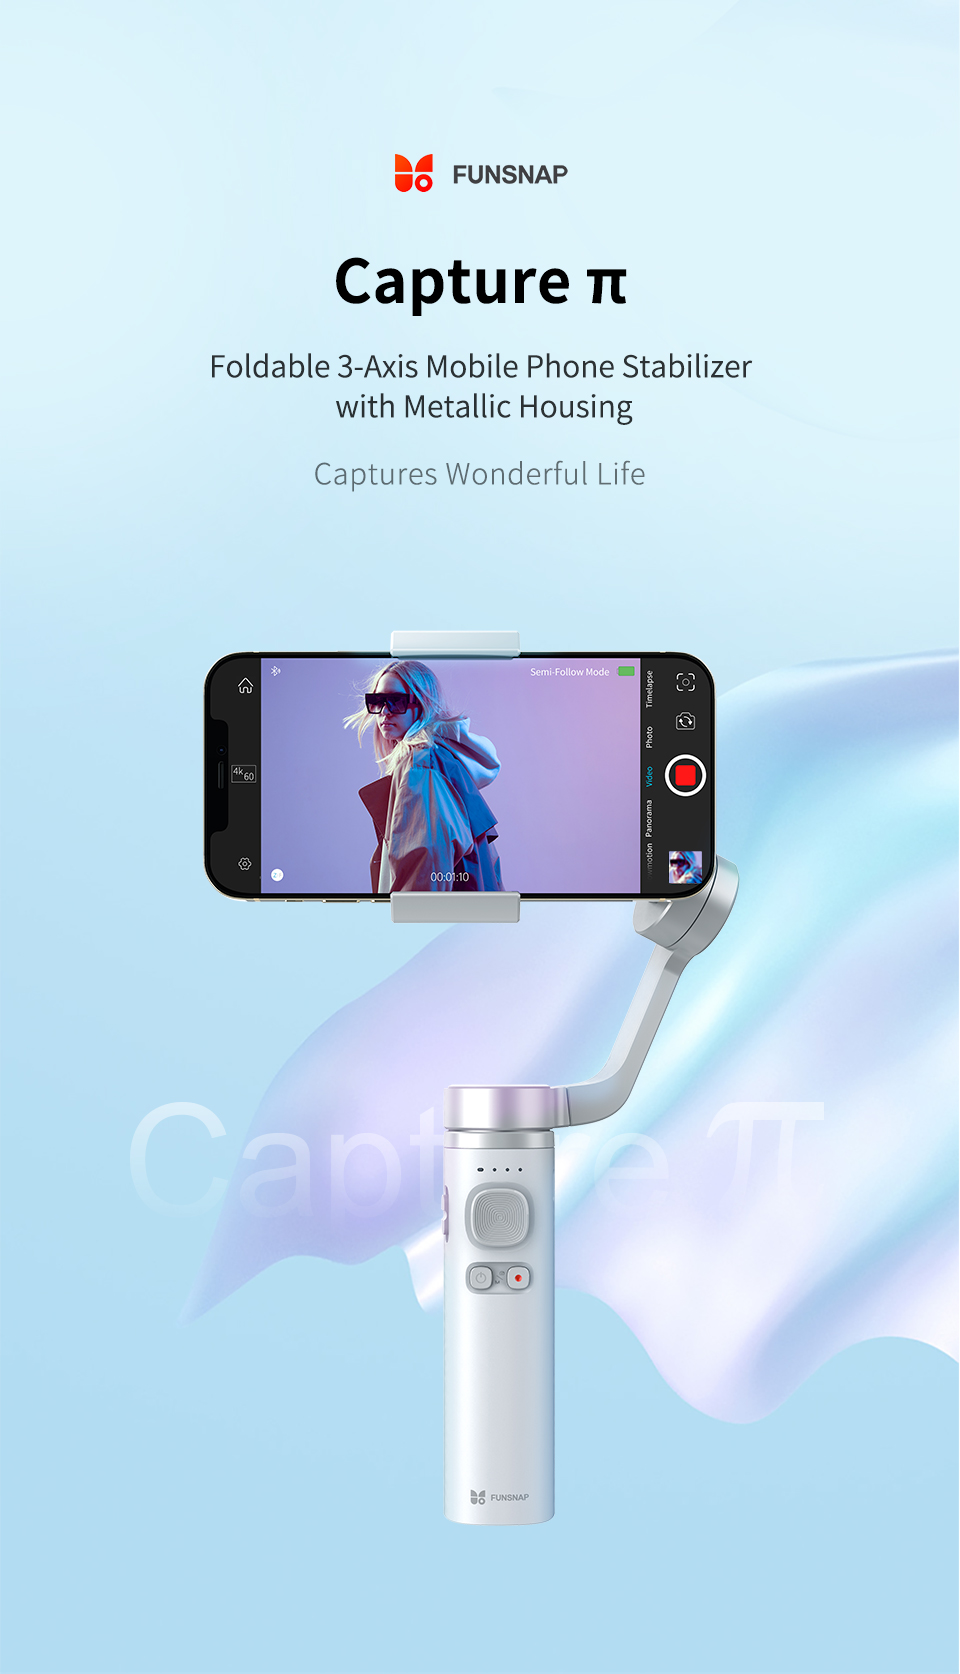 Funsnap-Capture-pi-3-Axis-Metal-Housing-bluetooth-Handheld-Gimbal-Stabilizer-Tracking-Action-for-iPh-1823425-1